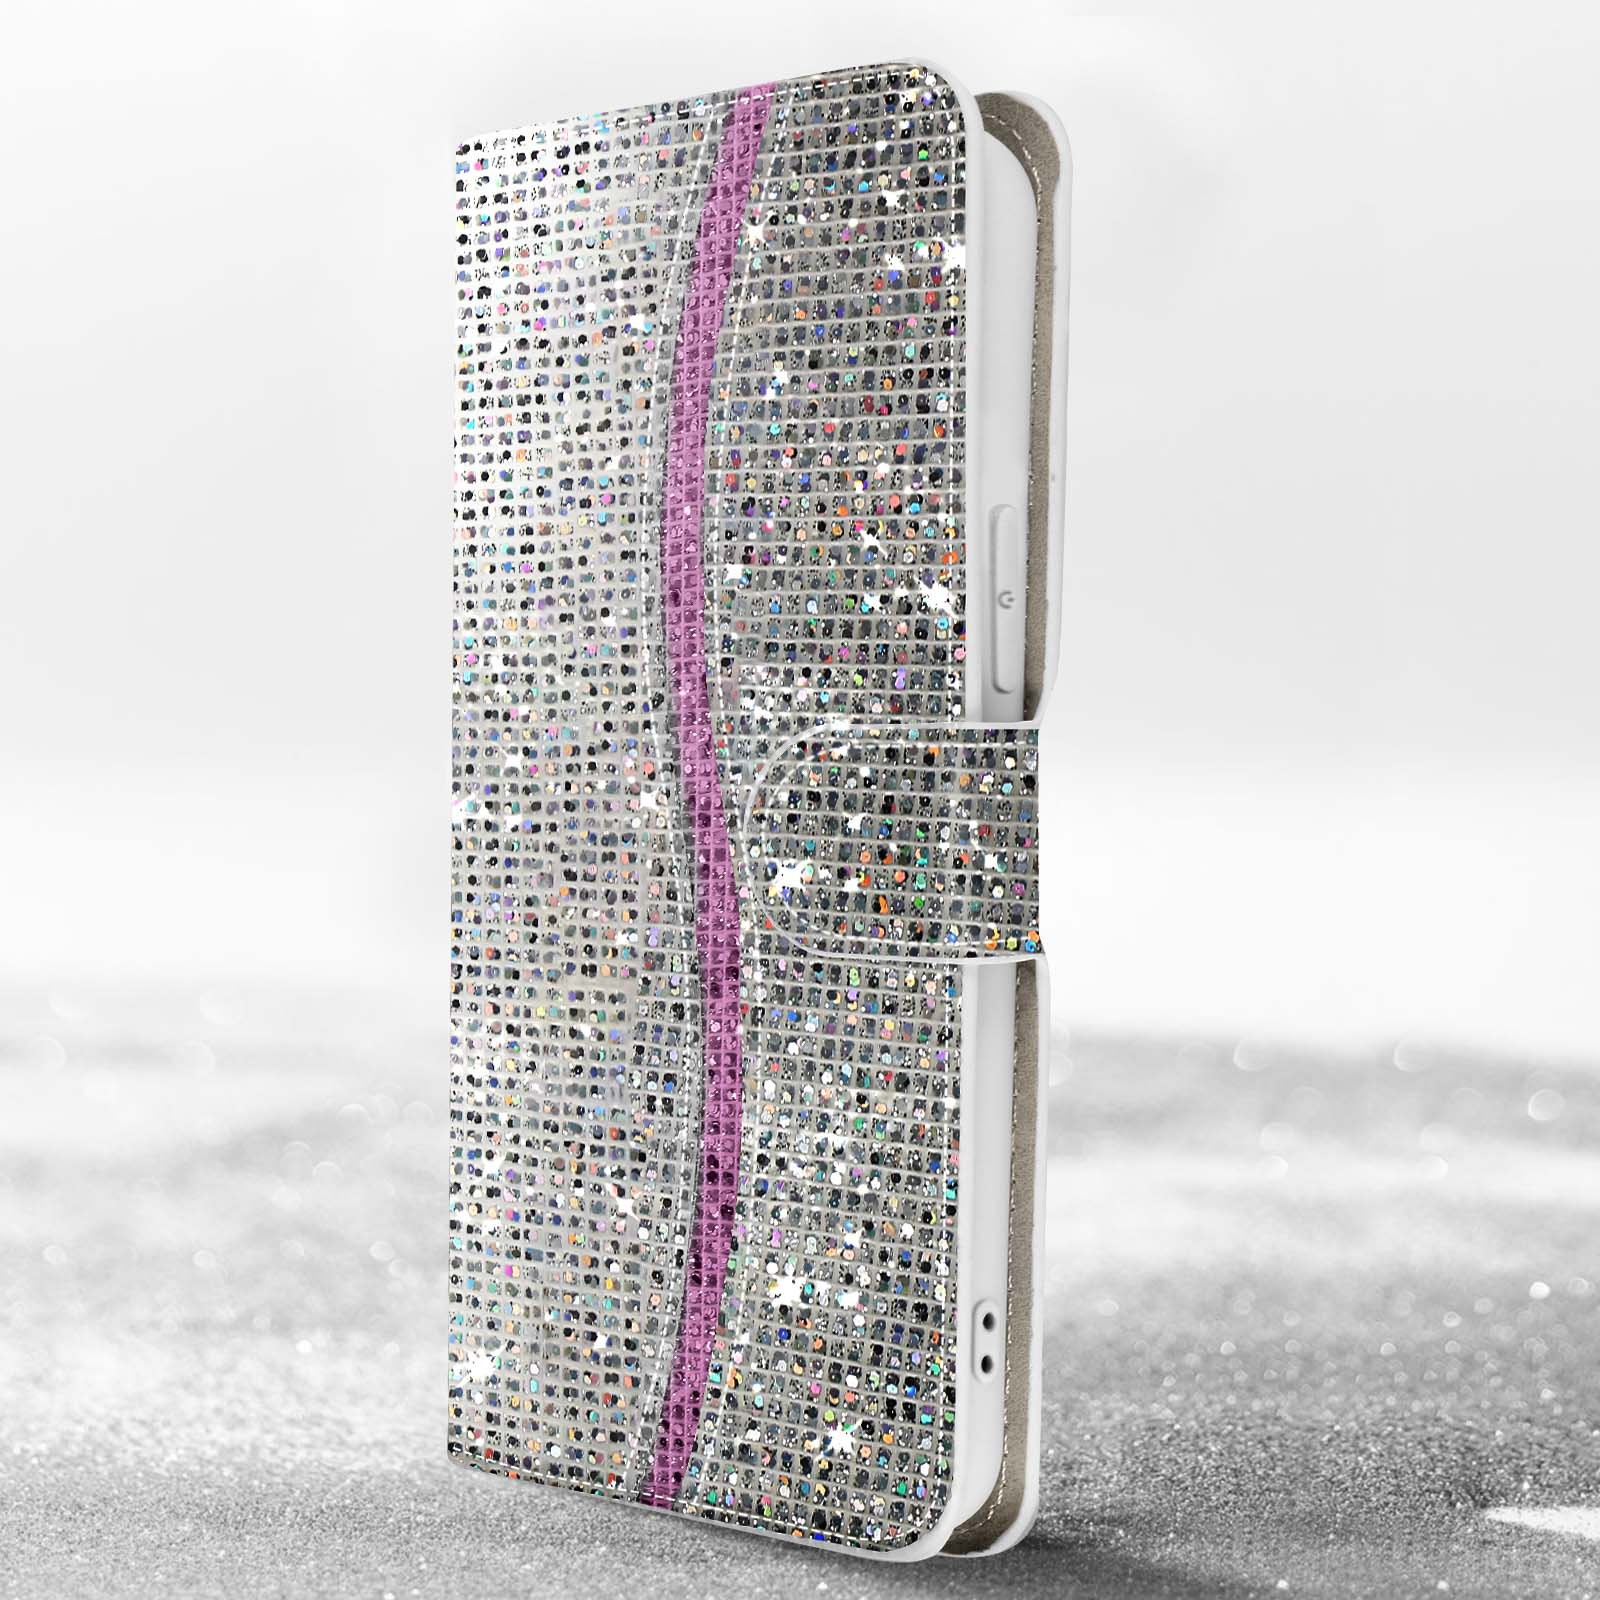 Edition 15 Bookcover, Disco Pro, Series, Glam Apple, AVIZAR Silber iPhone